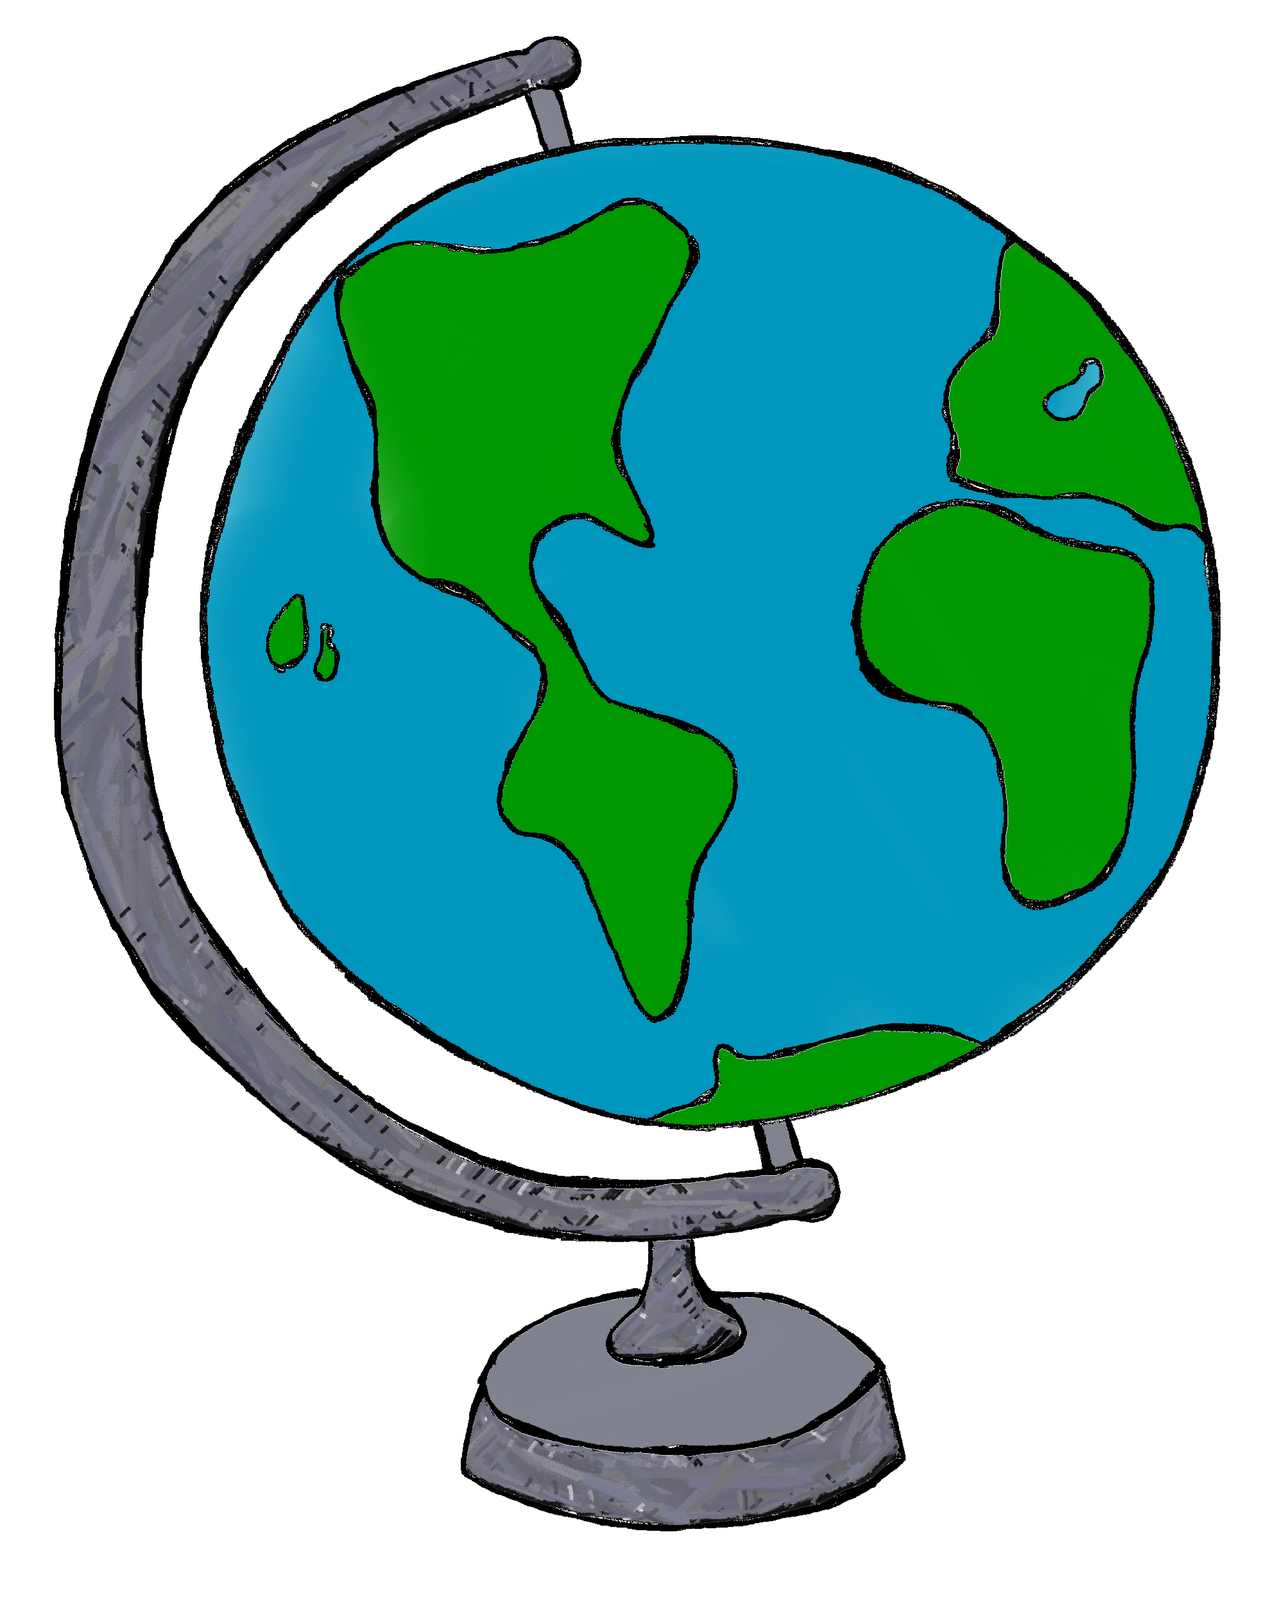 Globe earth clipart black and white free clipart images